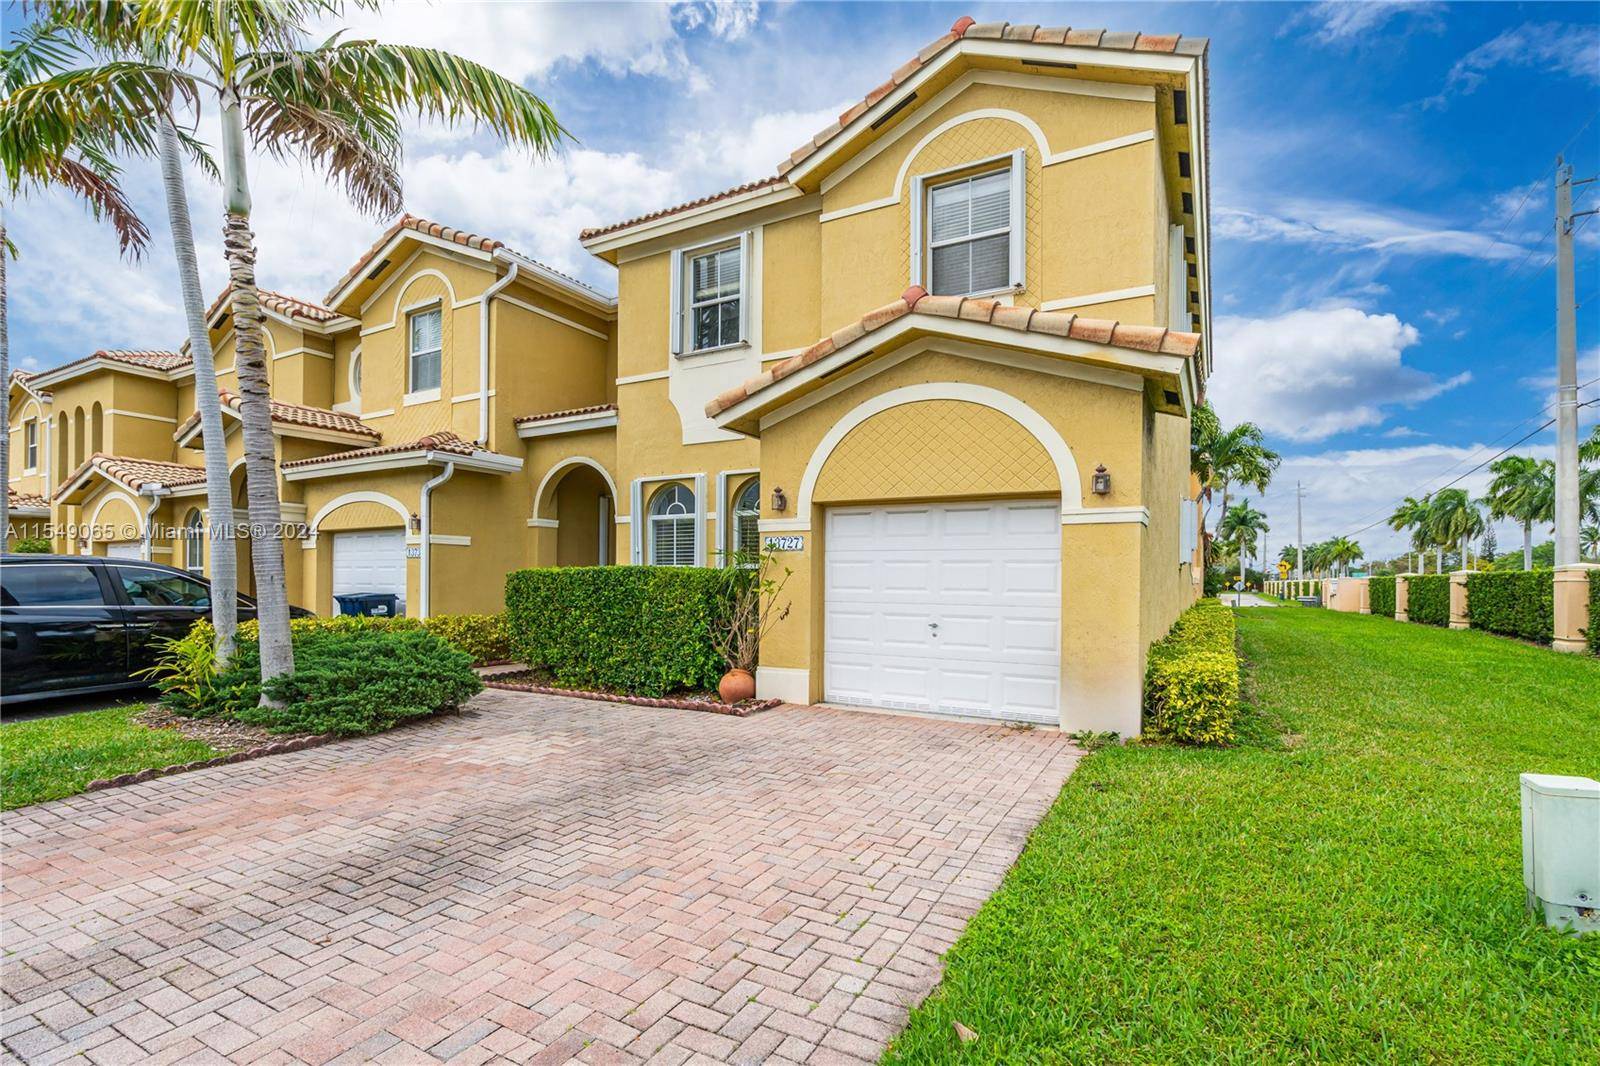 Beautiful 3 bed 2. 5 bath townhouse in Kendall Breeze West.